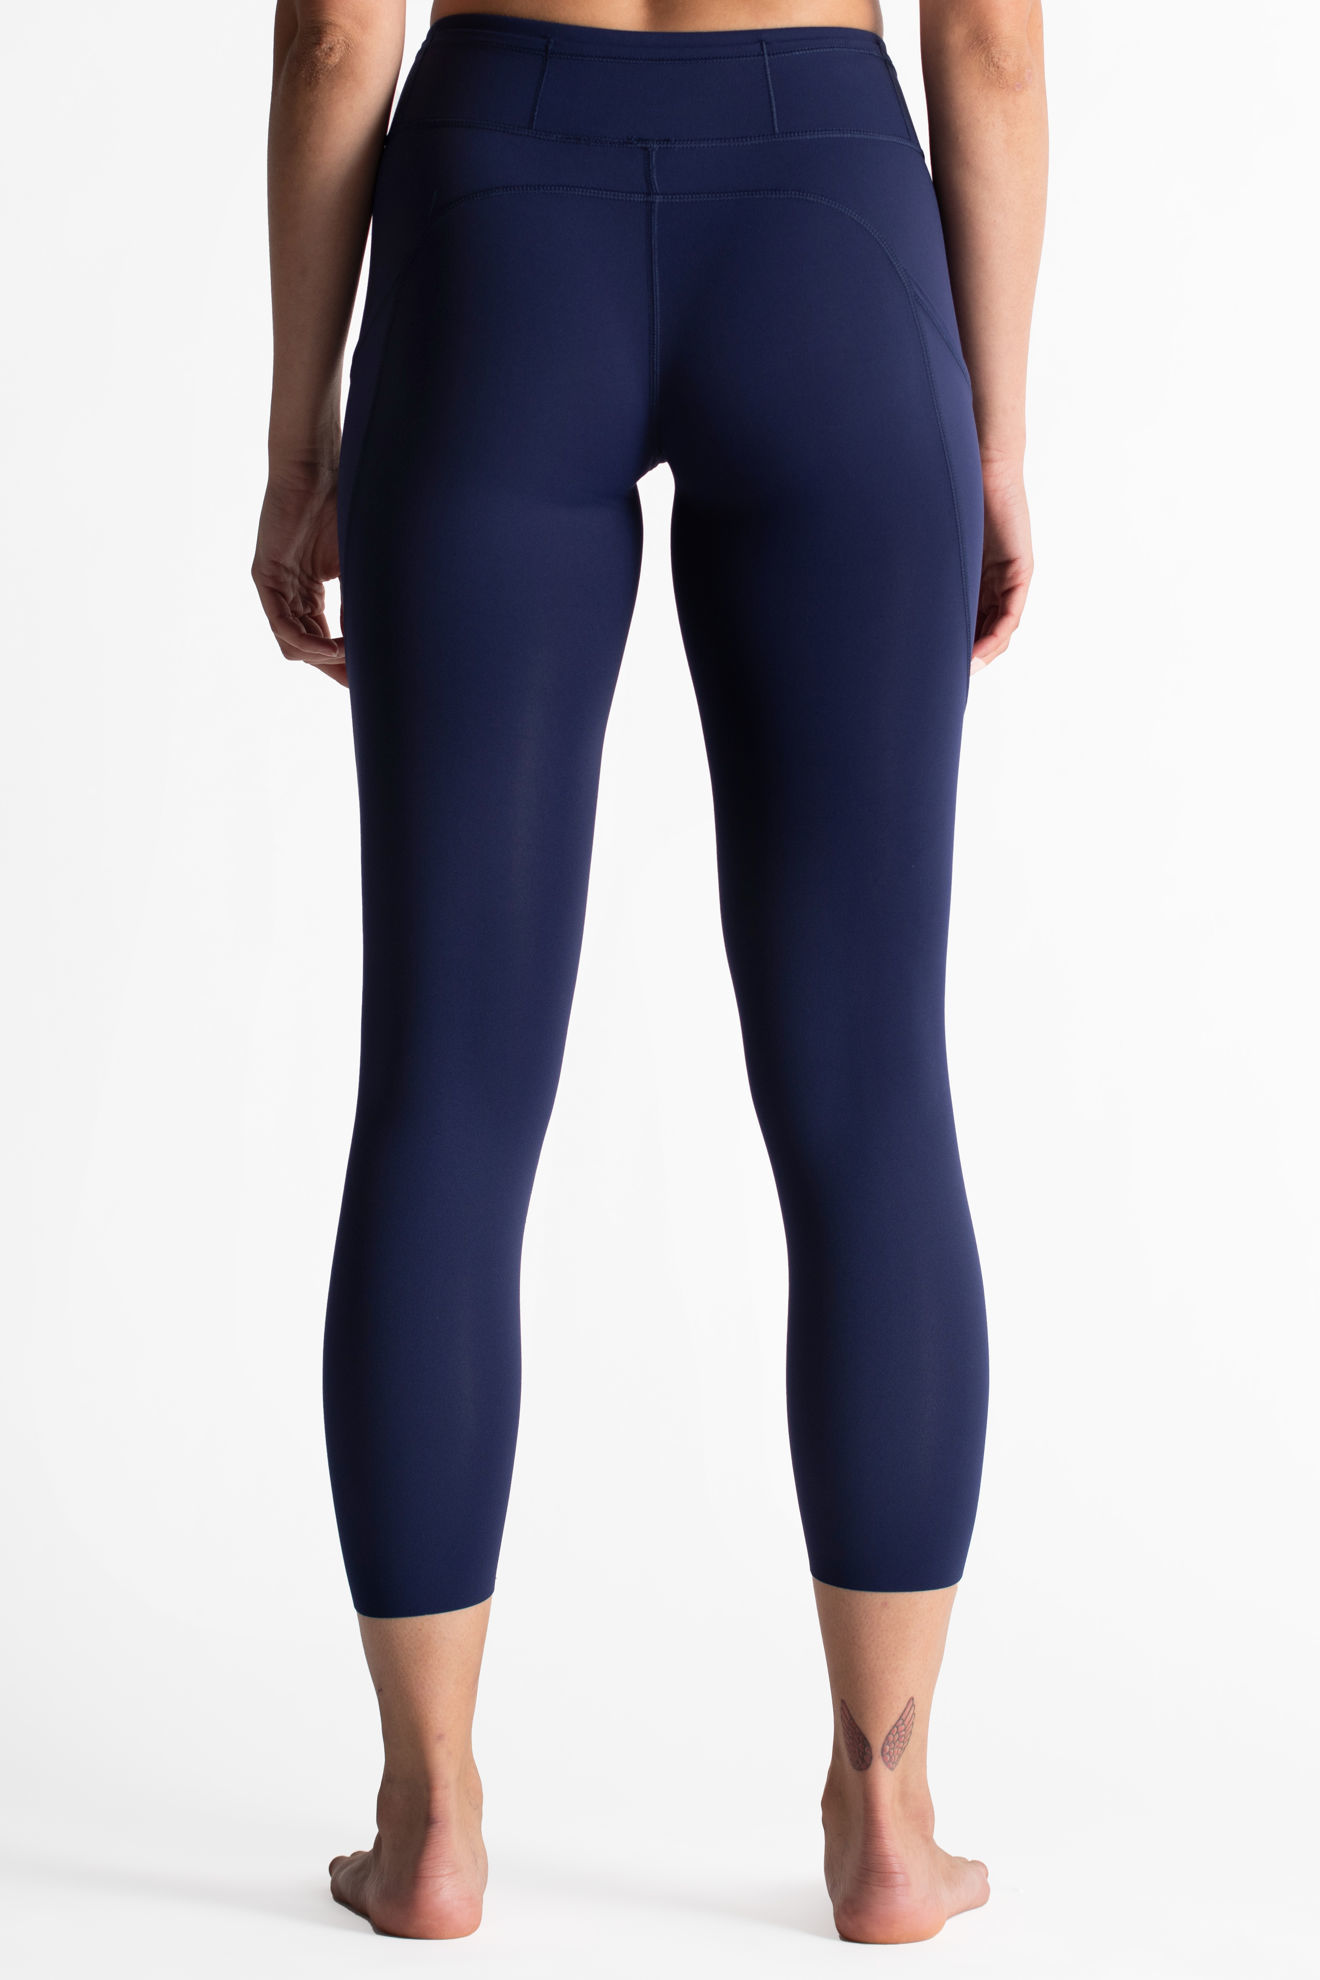 Picture of Fluxxe Peacock Legging-Blue